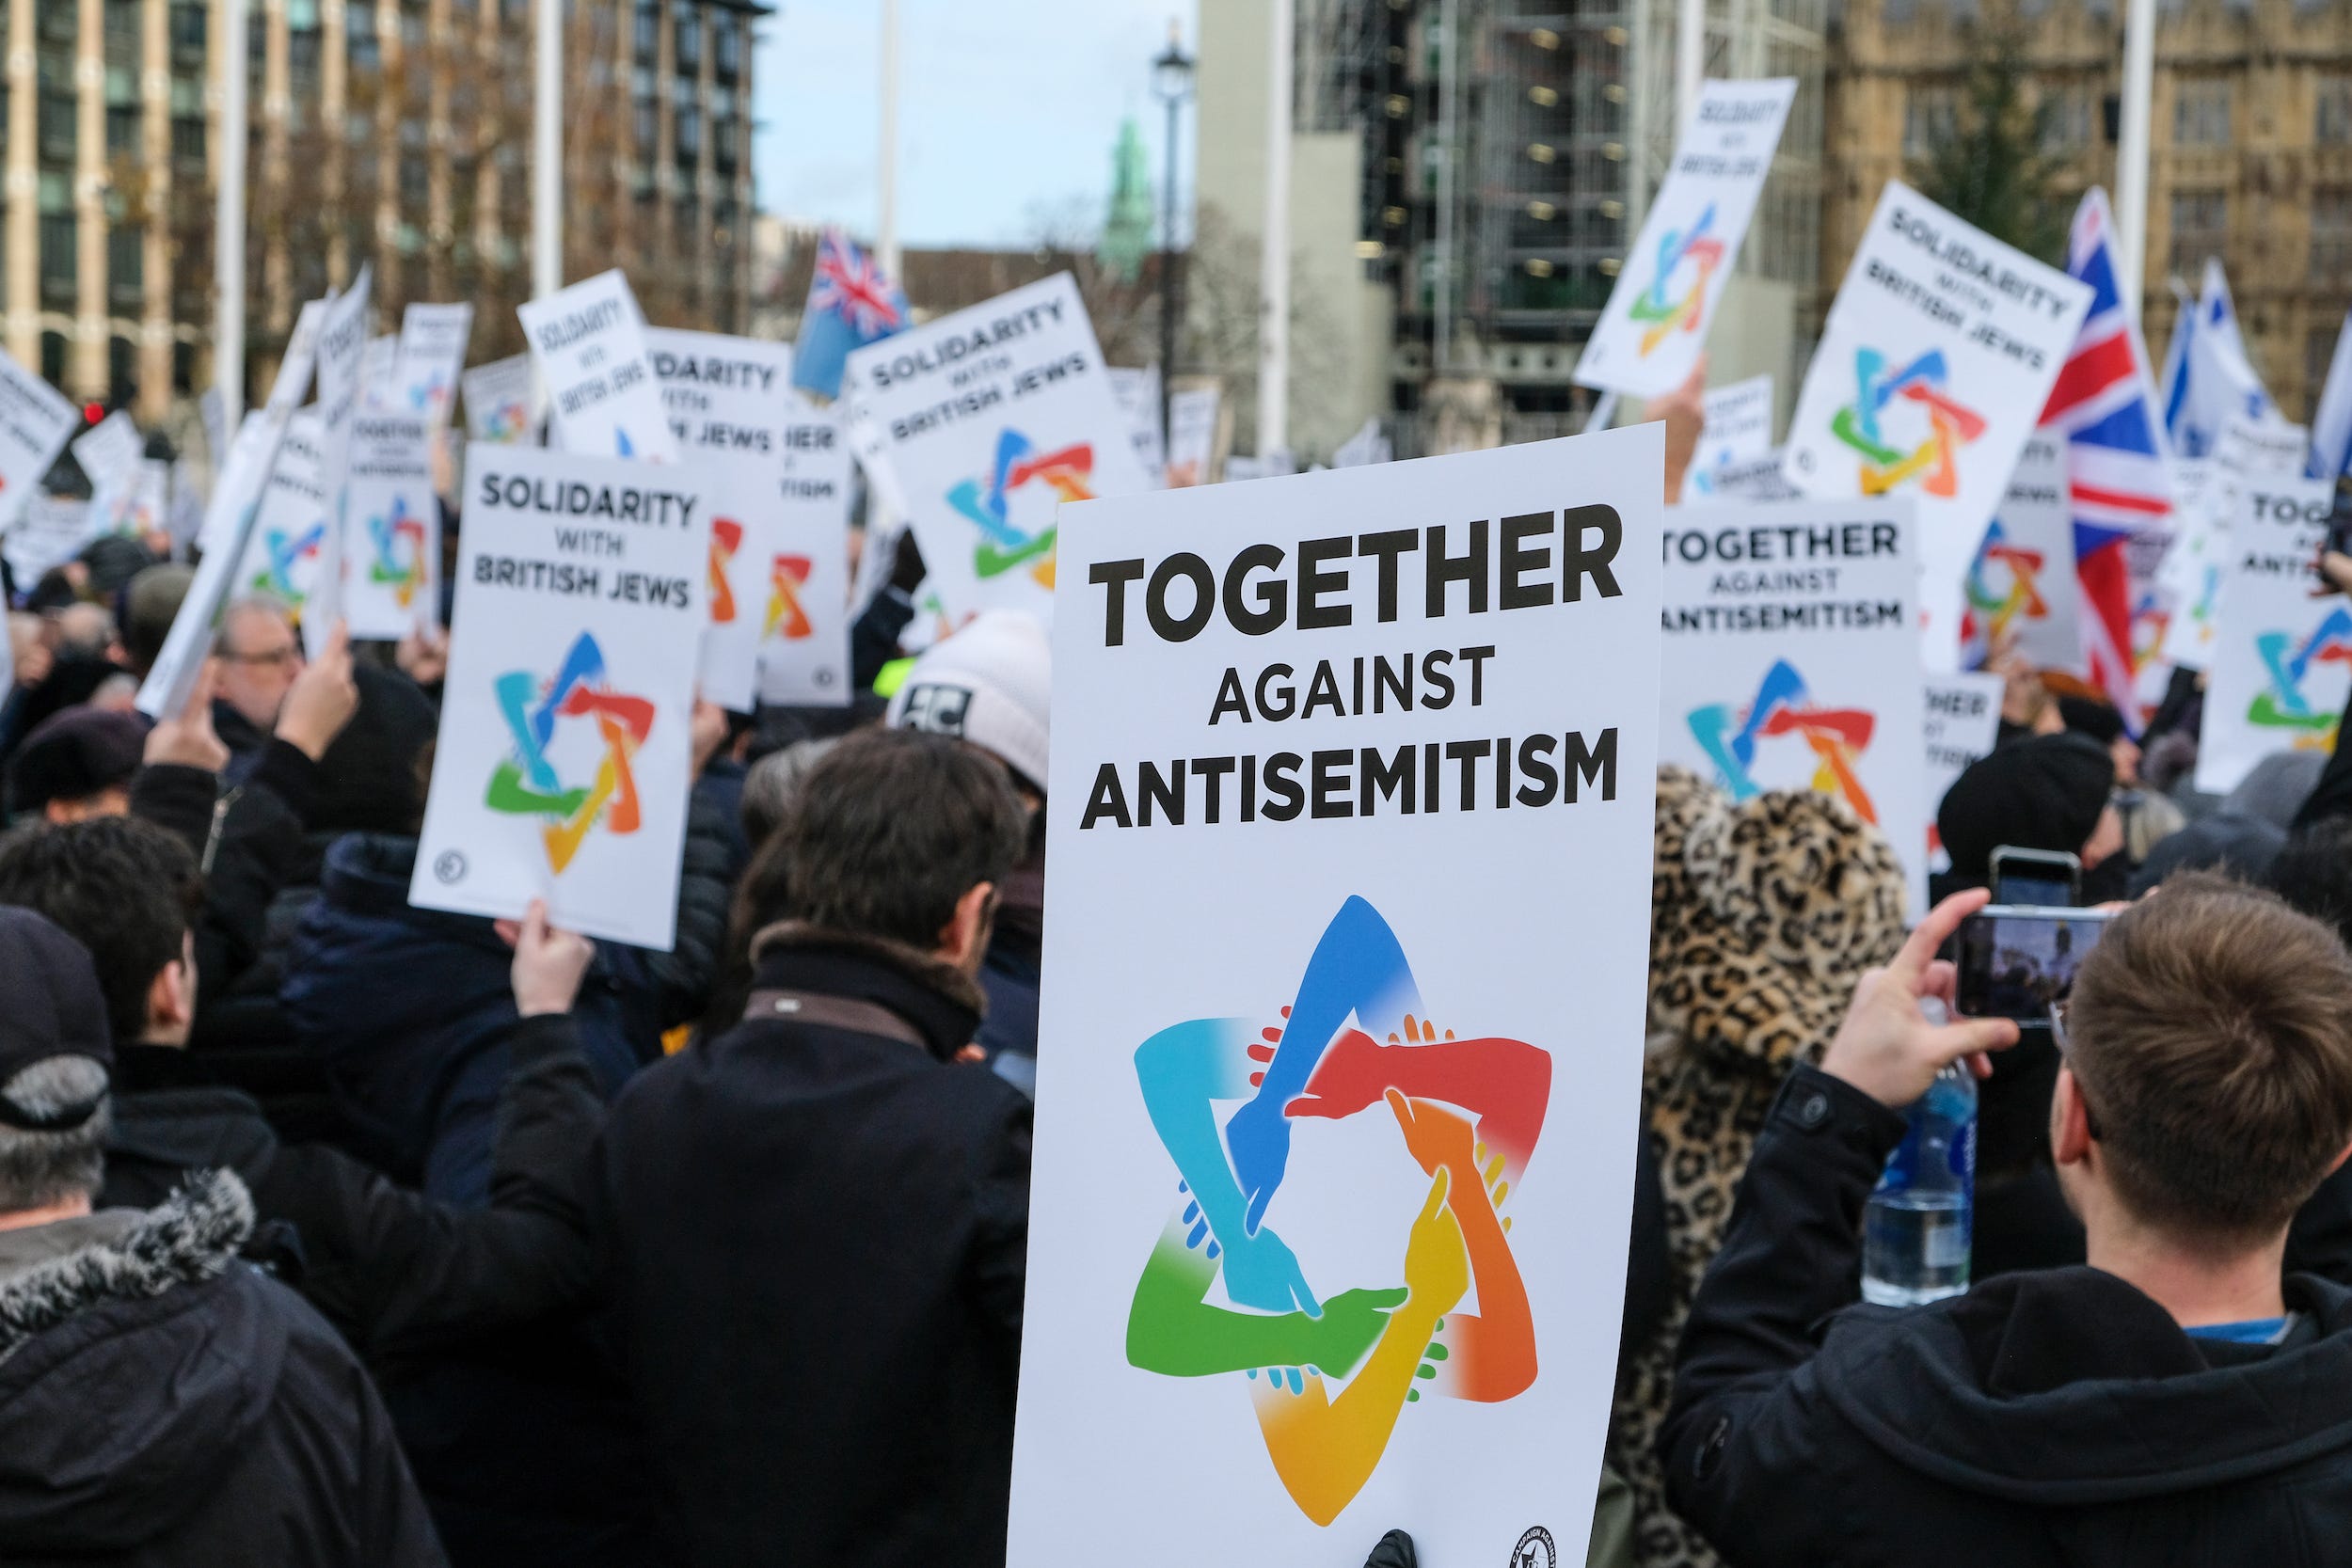 People stage a Together Against Antisemitism rally in London's Parliament Square in December 2019.